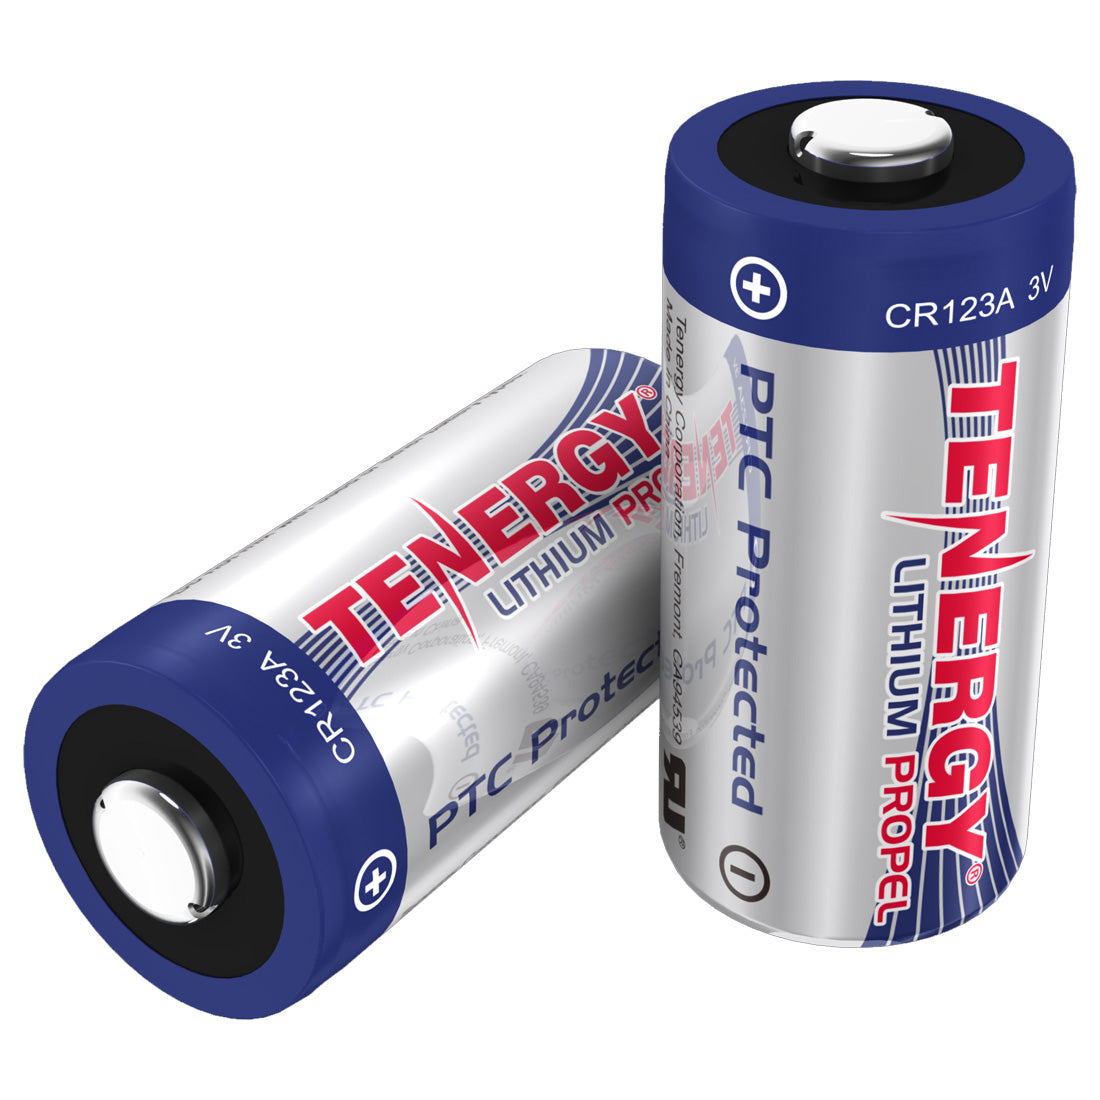 Tenergy CR123A Lithium Propel Battery - 2 Pack